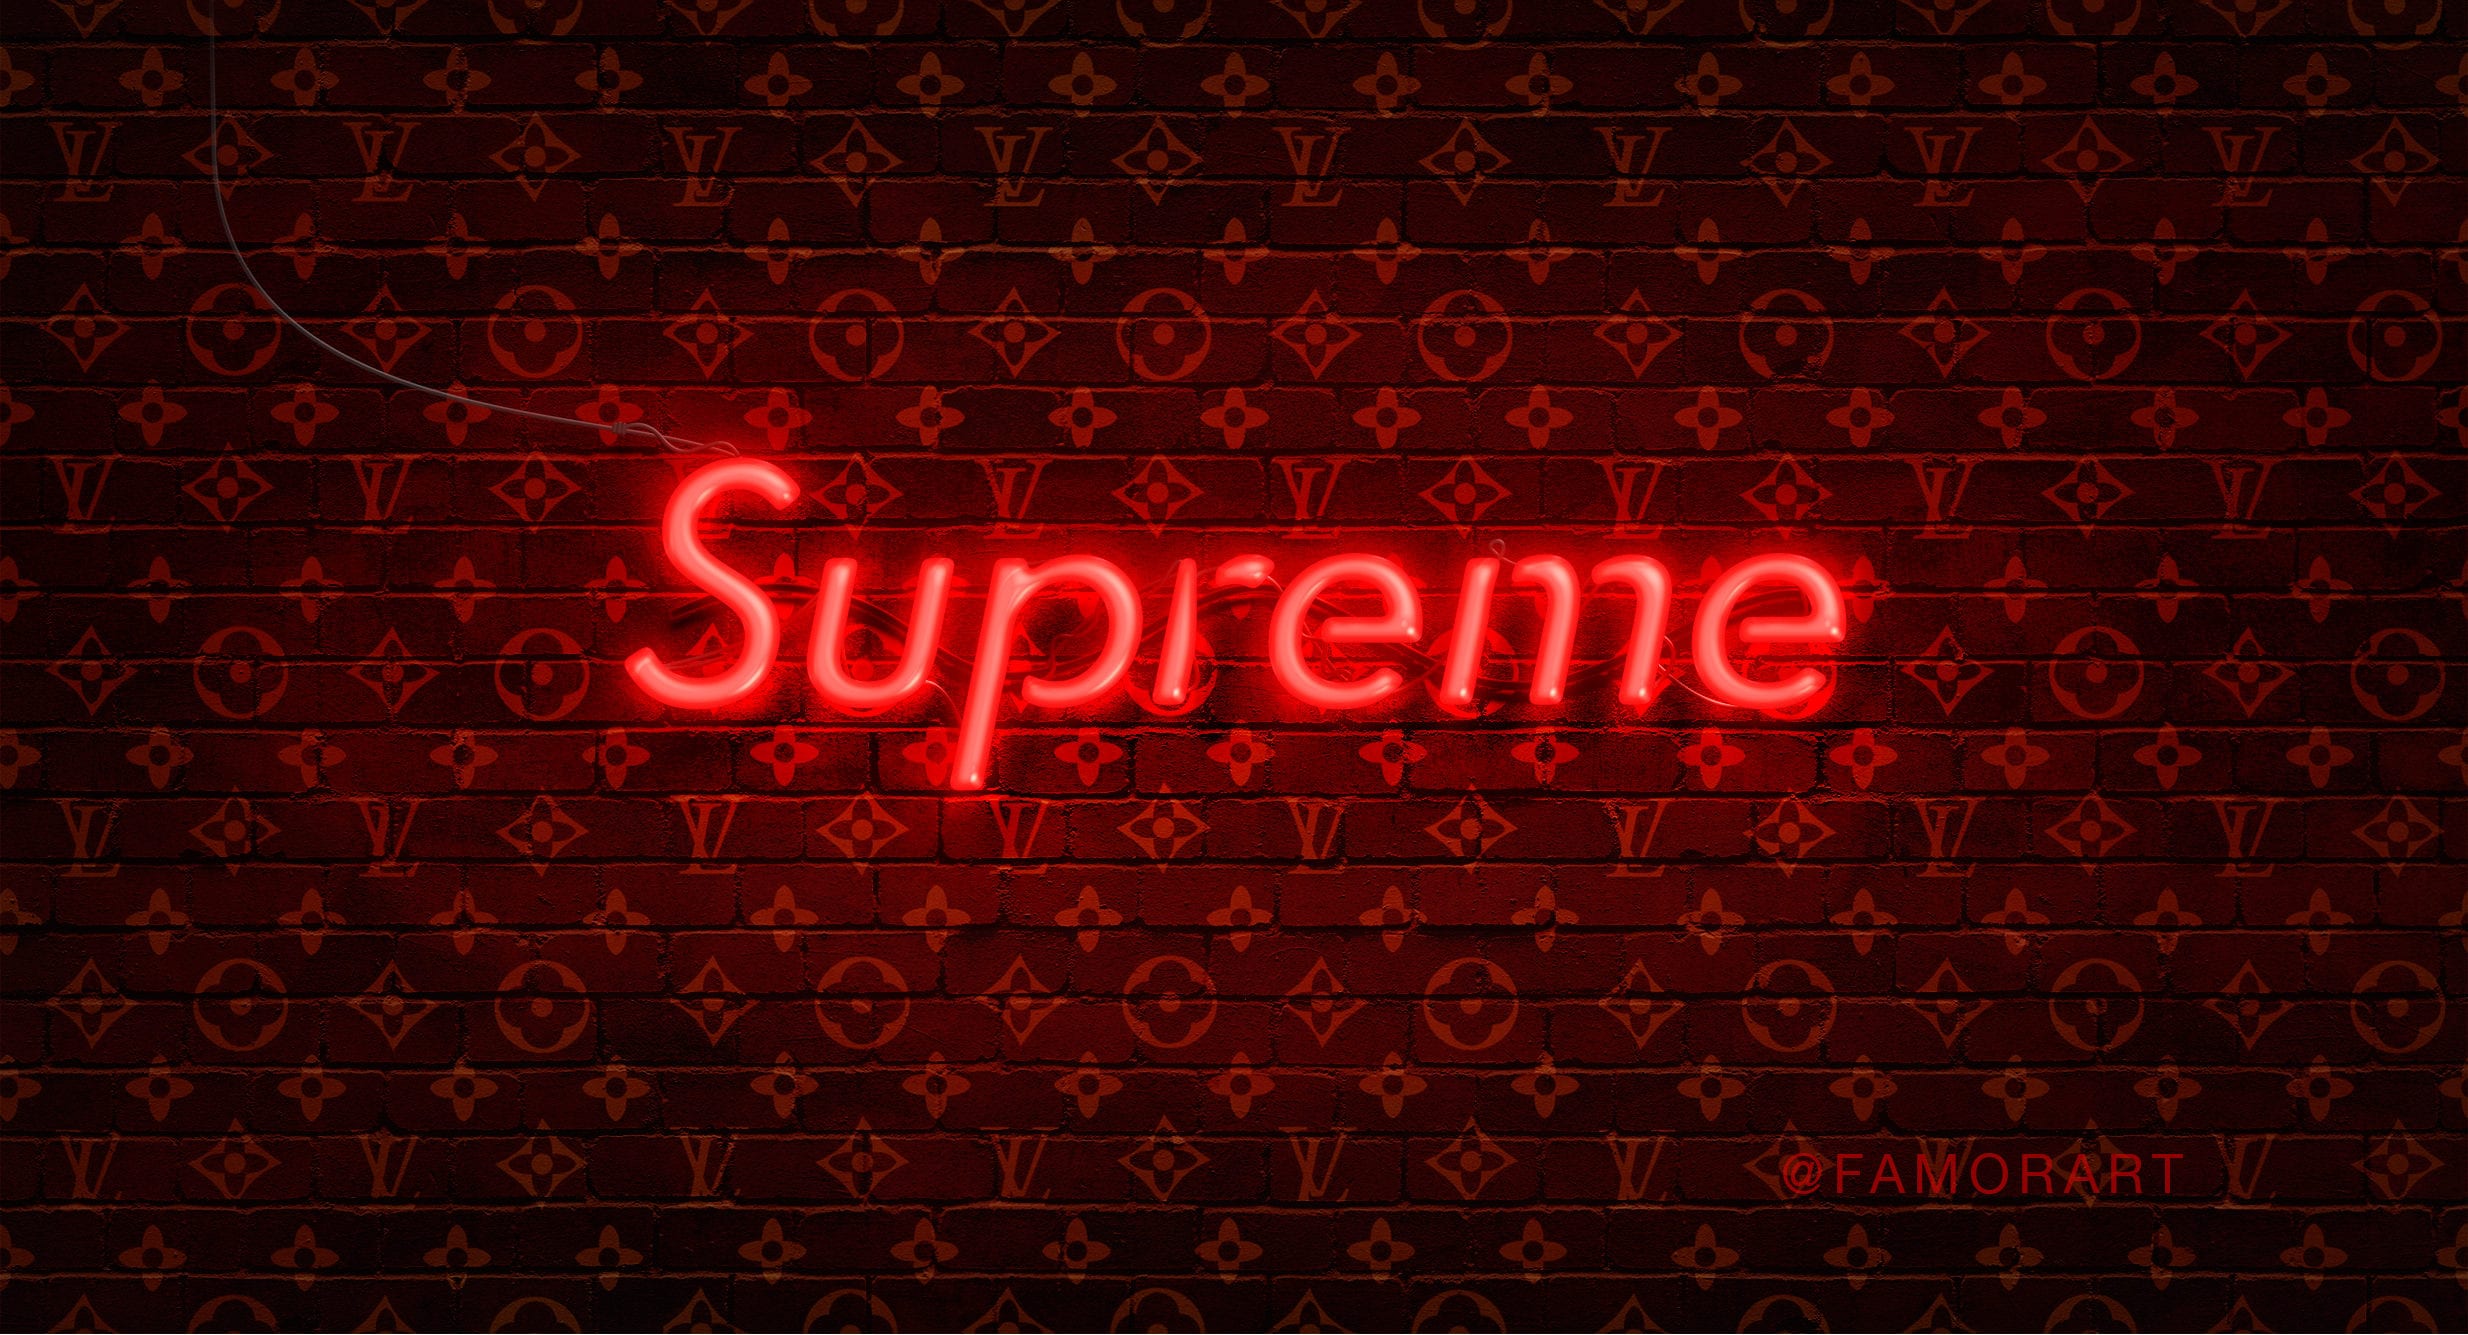 Lv Background Red : SUPREME x LOUIS VUITTON | Wallpapers | Pinterest ...